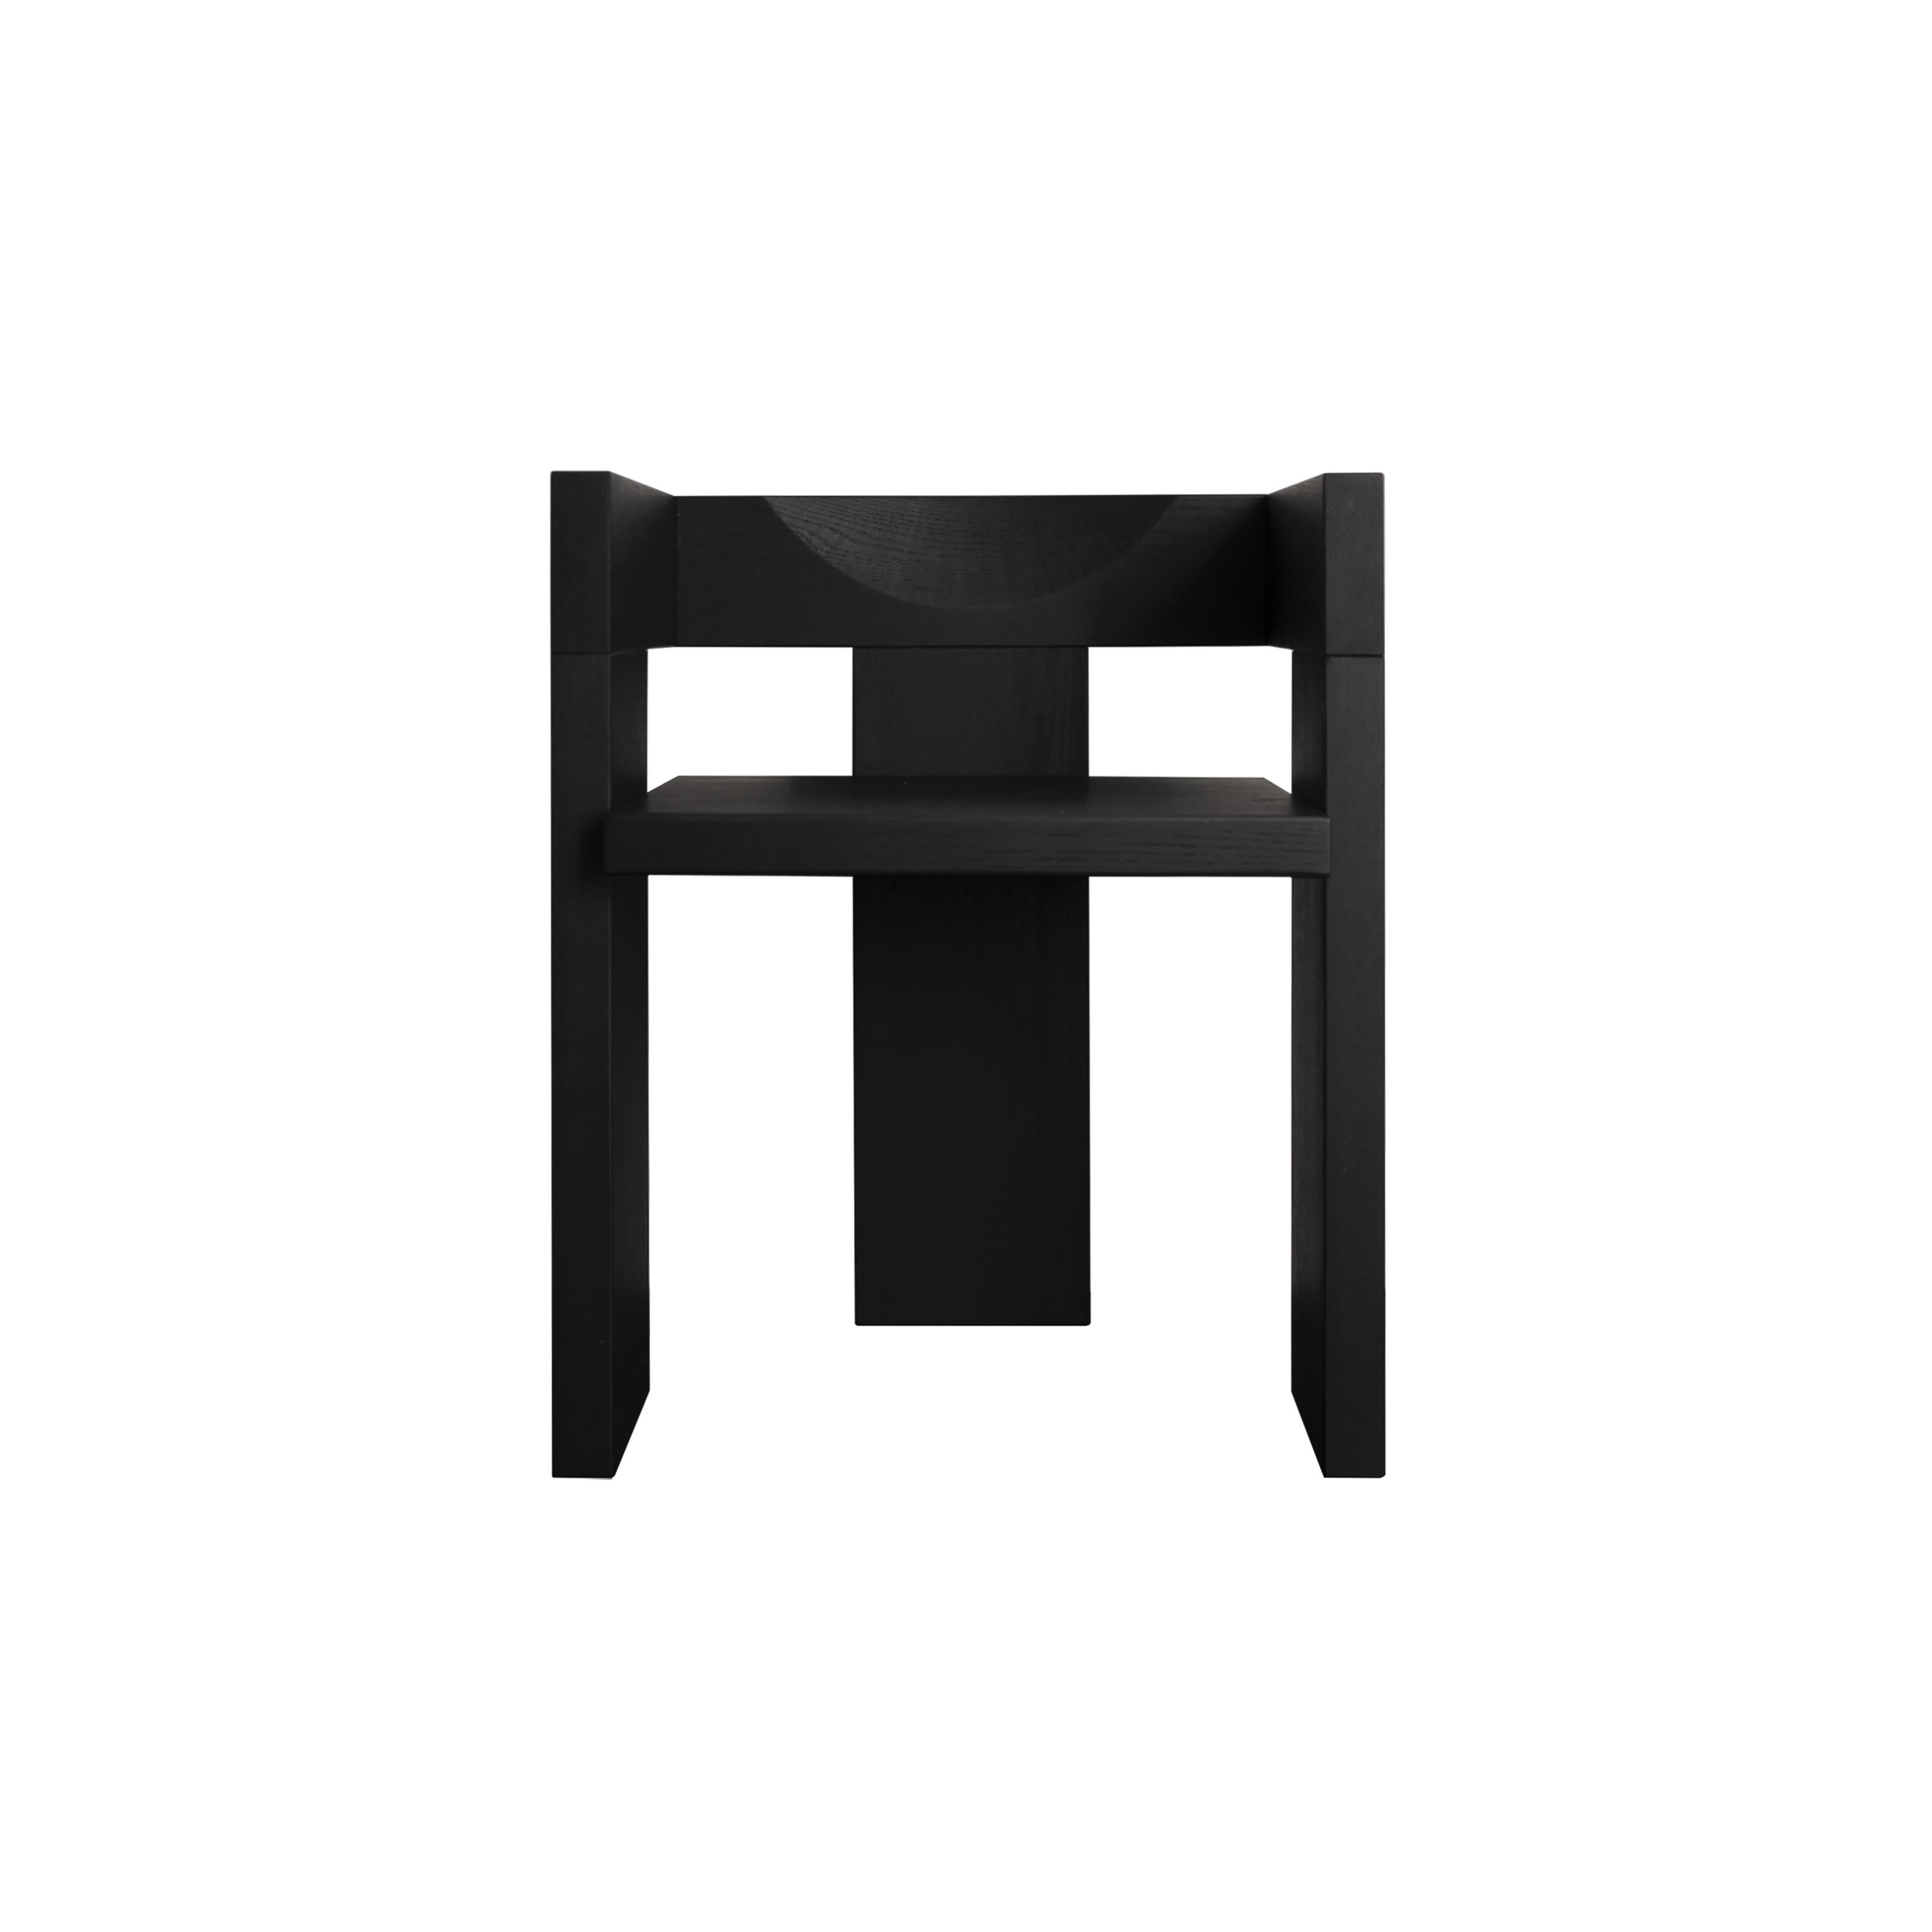 001 Ert, Sculputural Chair in Ebonized Solid Oak In New Condition For Sale In Milano, IT